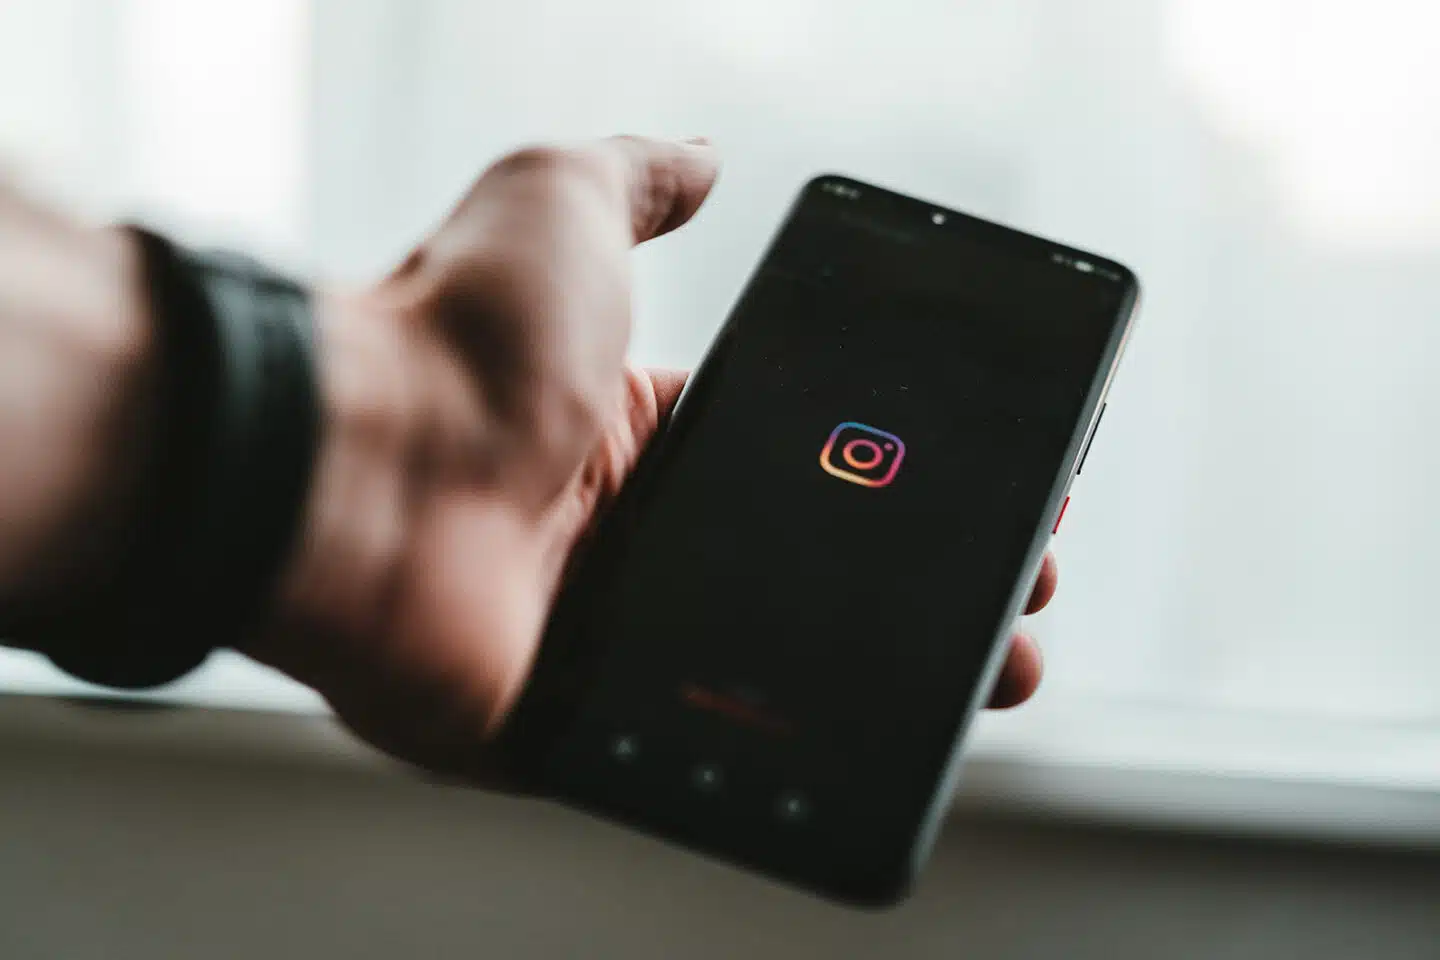 Instagram account hacked? Here's what to do, by lifestyle blogger What The Fab